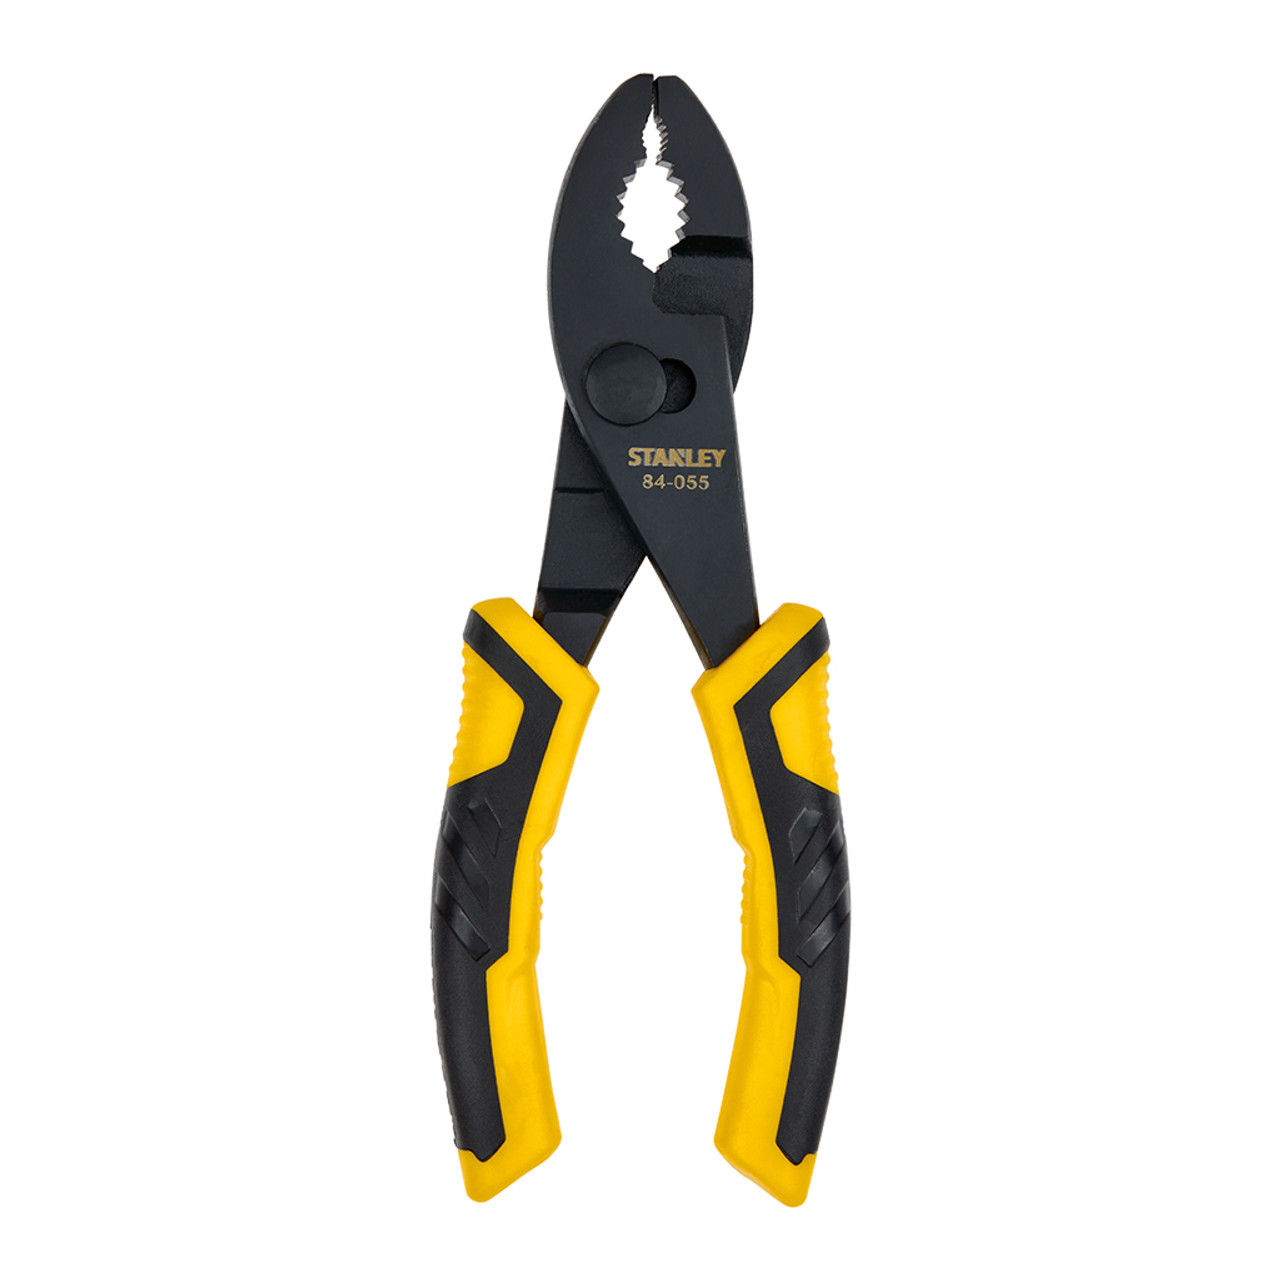 Stanley Bi-Material Slip Joint Pliers, 6 - Midwest Technology Products